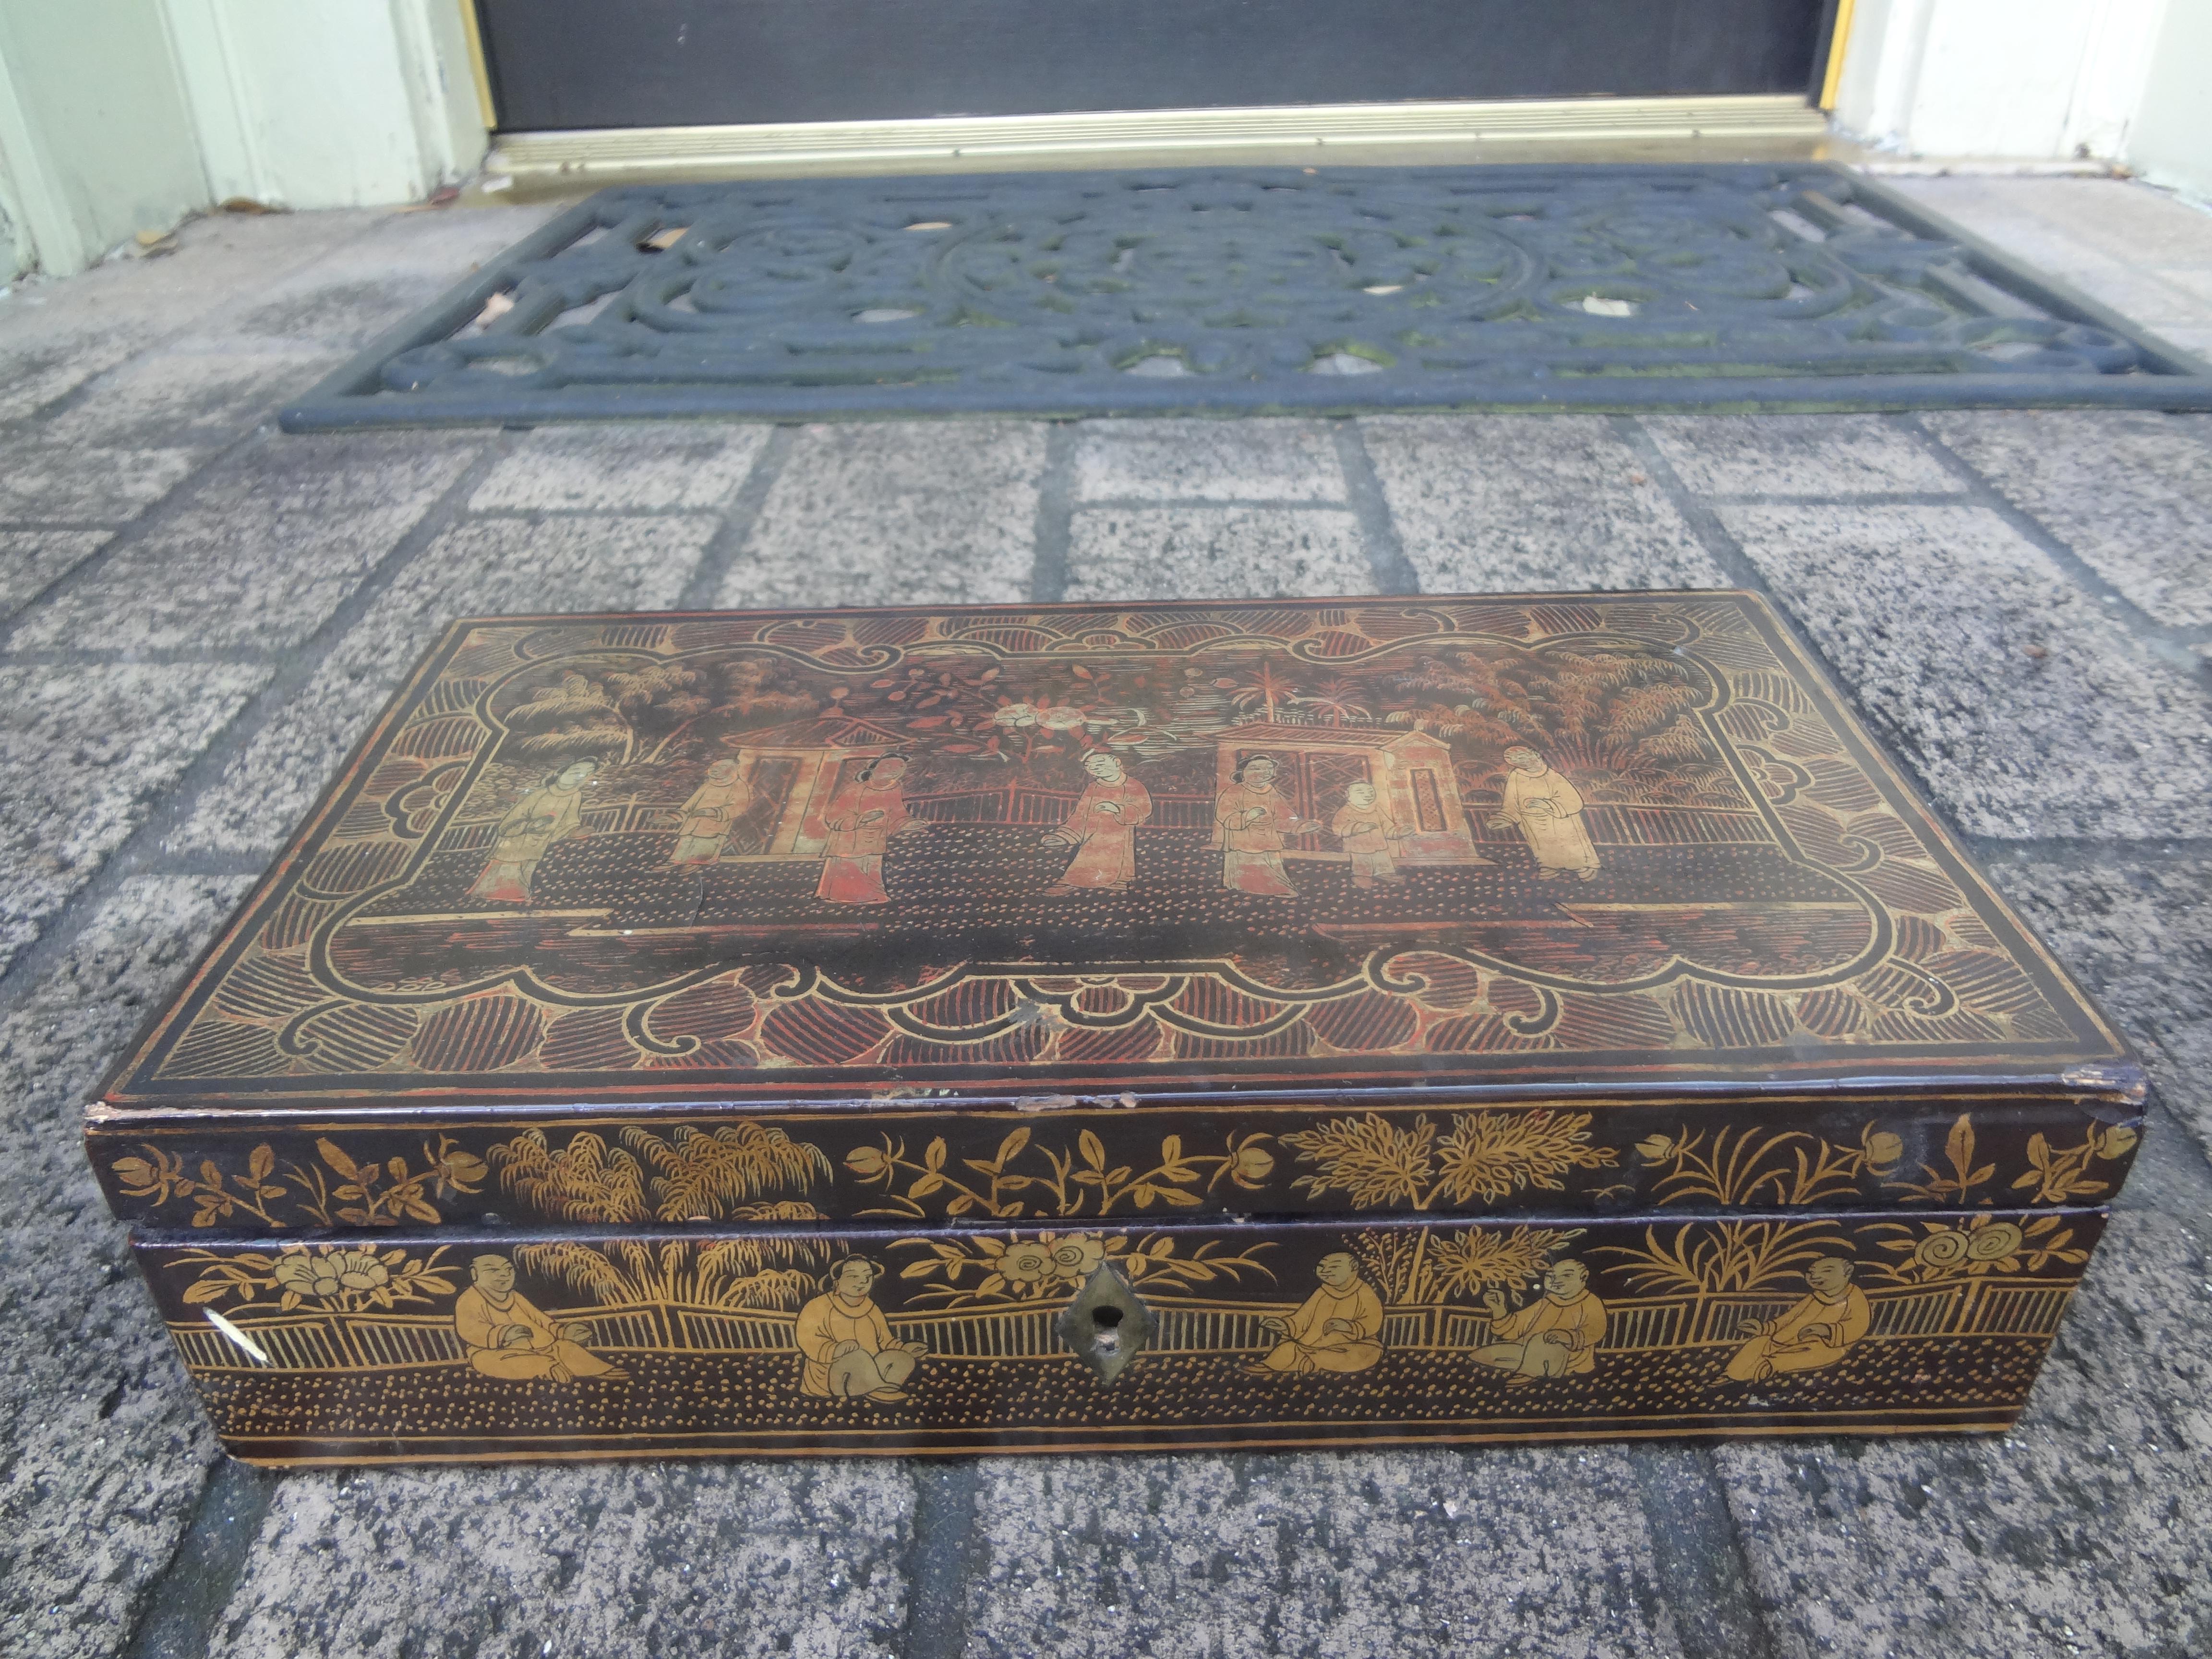 Antique Chinese lacquer decorated decorative box. This Stunning Chinese export hand decorated lacquered box is the perfect accessory for a coffee table or dressing table. Could be used for jewelry or important documents.